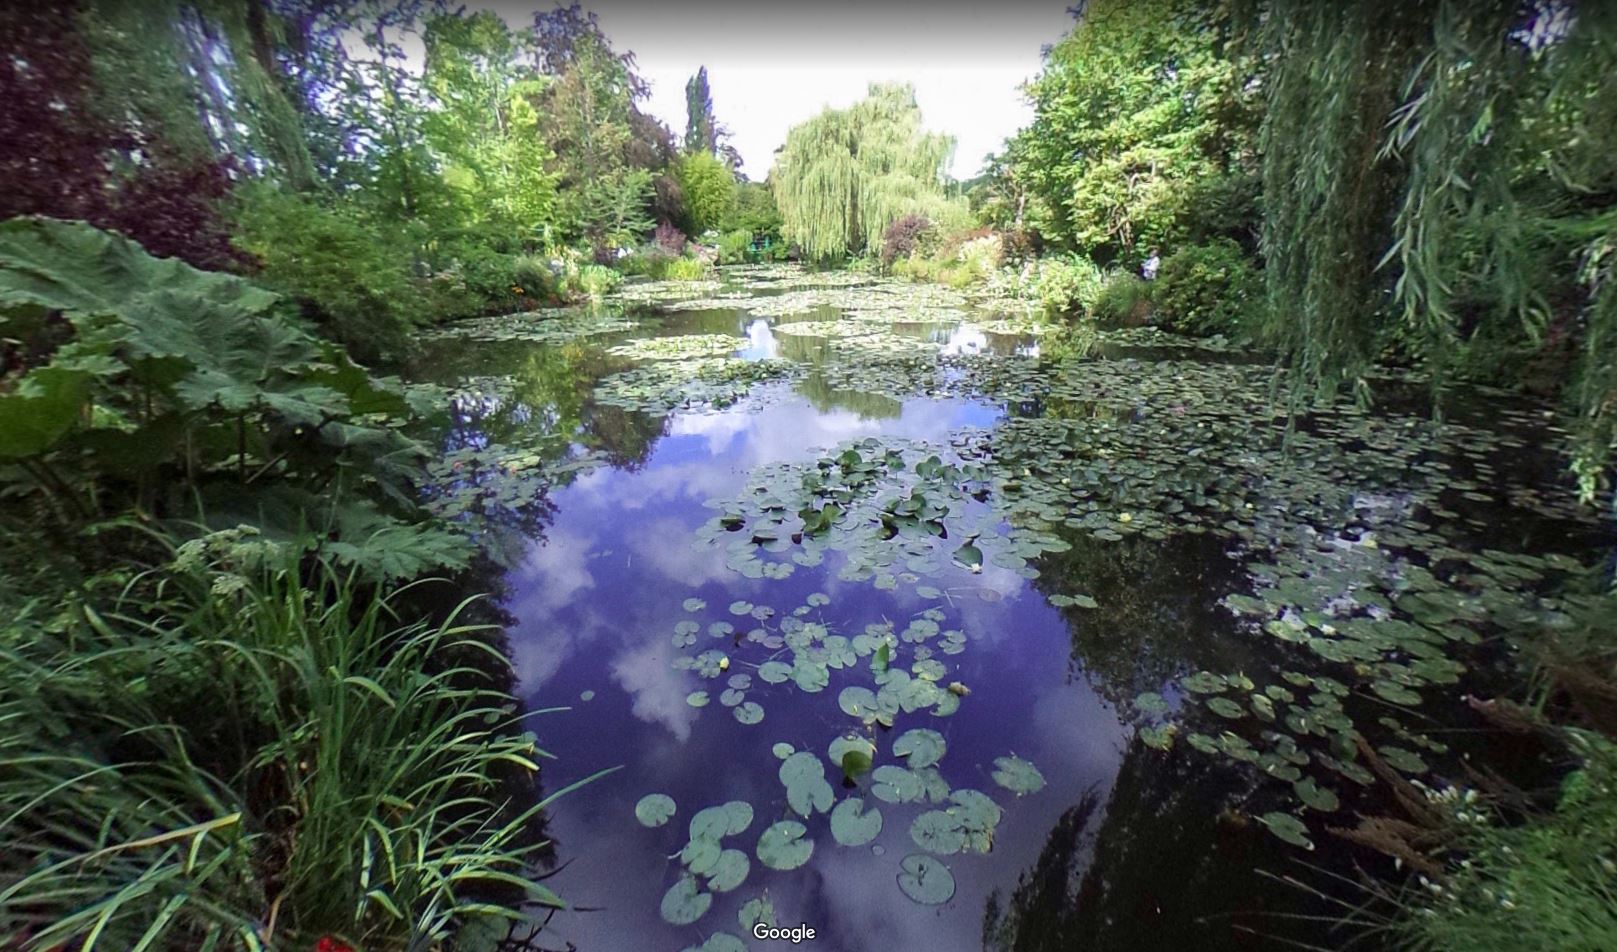 View of the lily pond at Giverny, as seen on Google Street View.